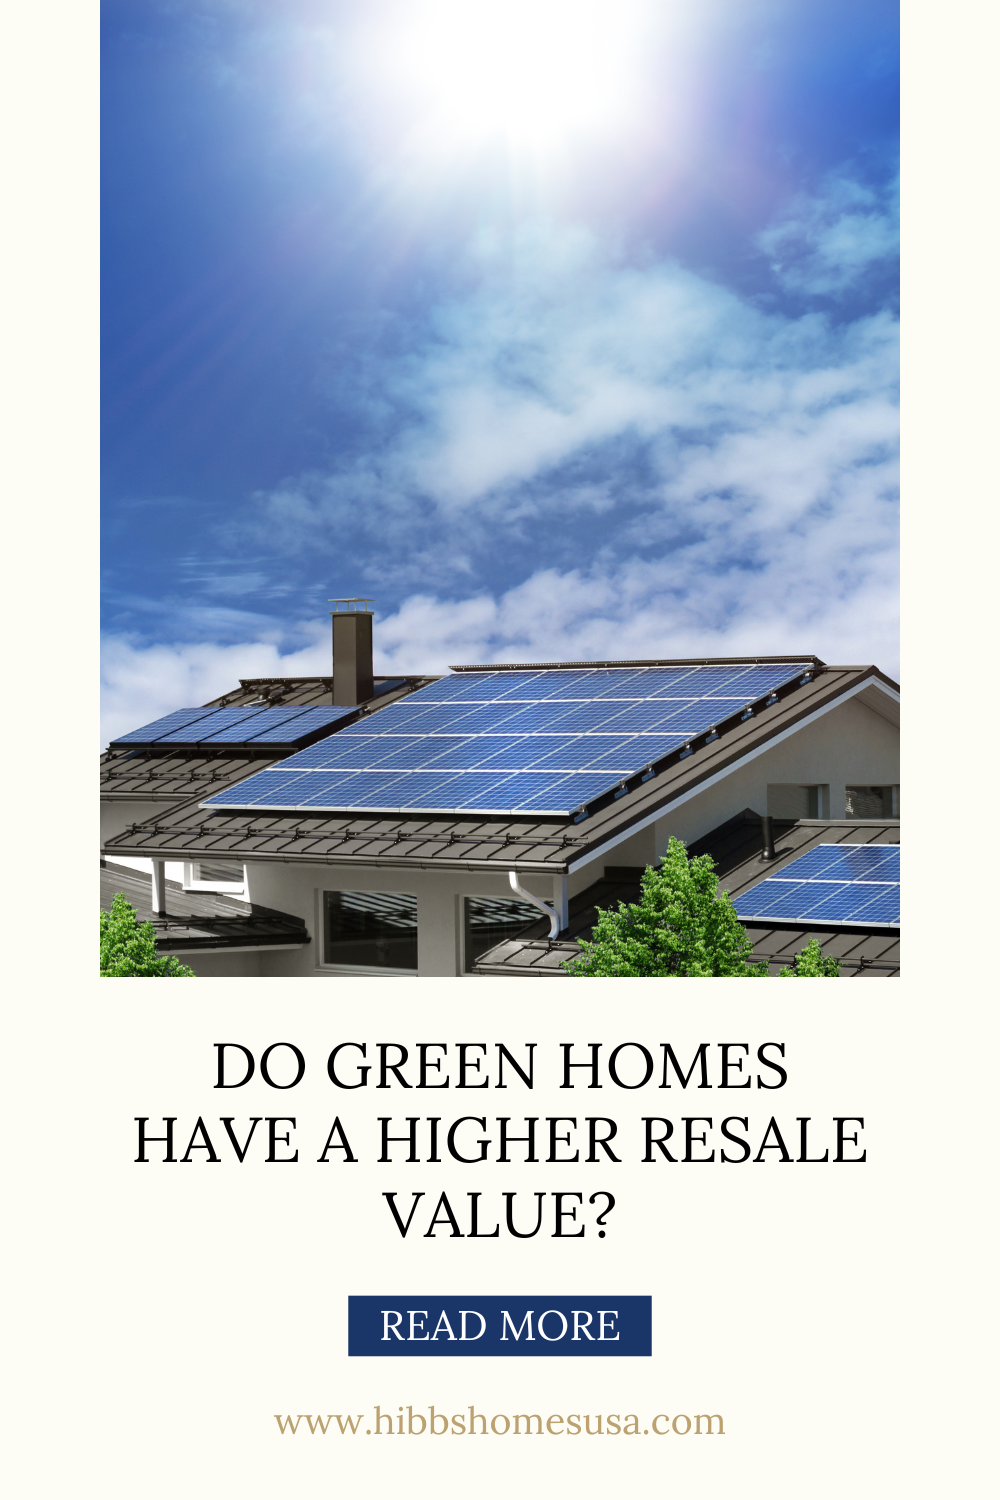 Do Green Homes Have a Higher Resale Value?